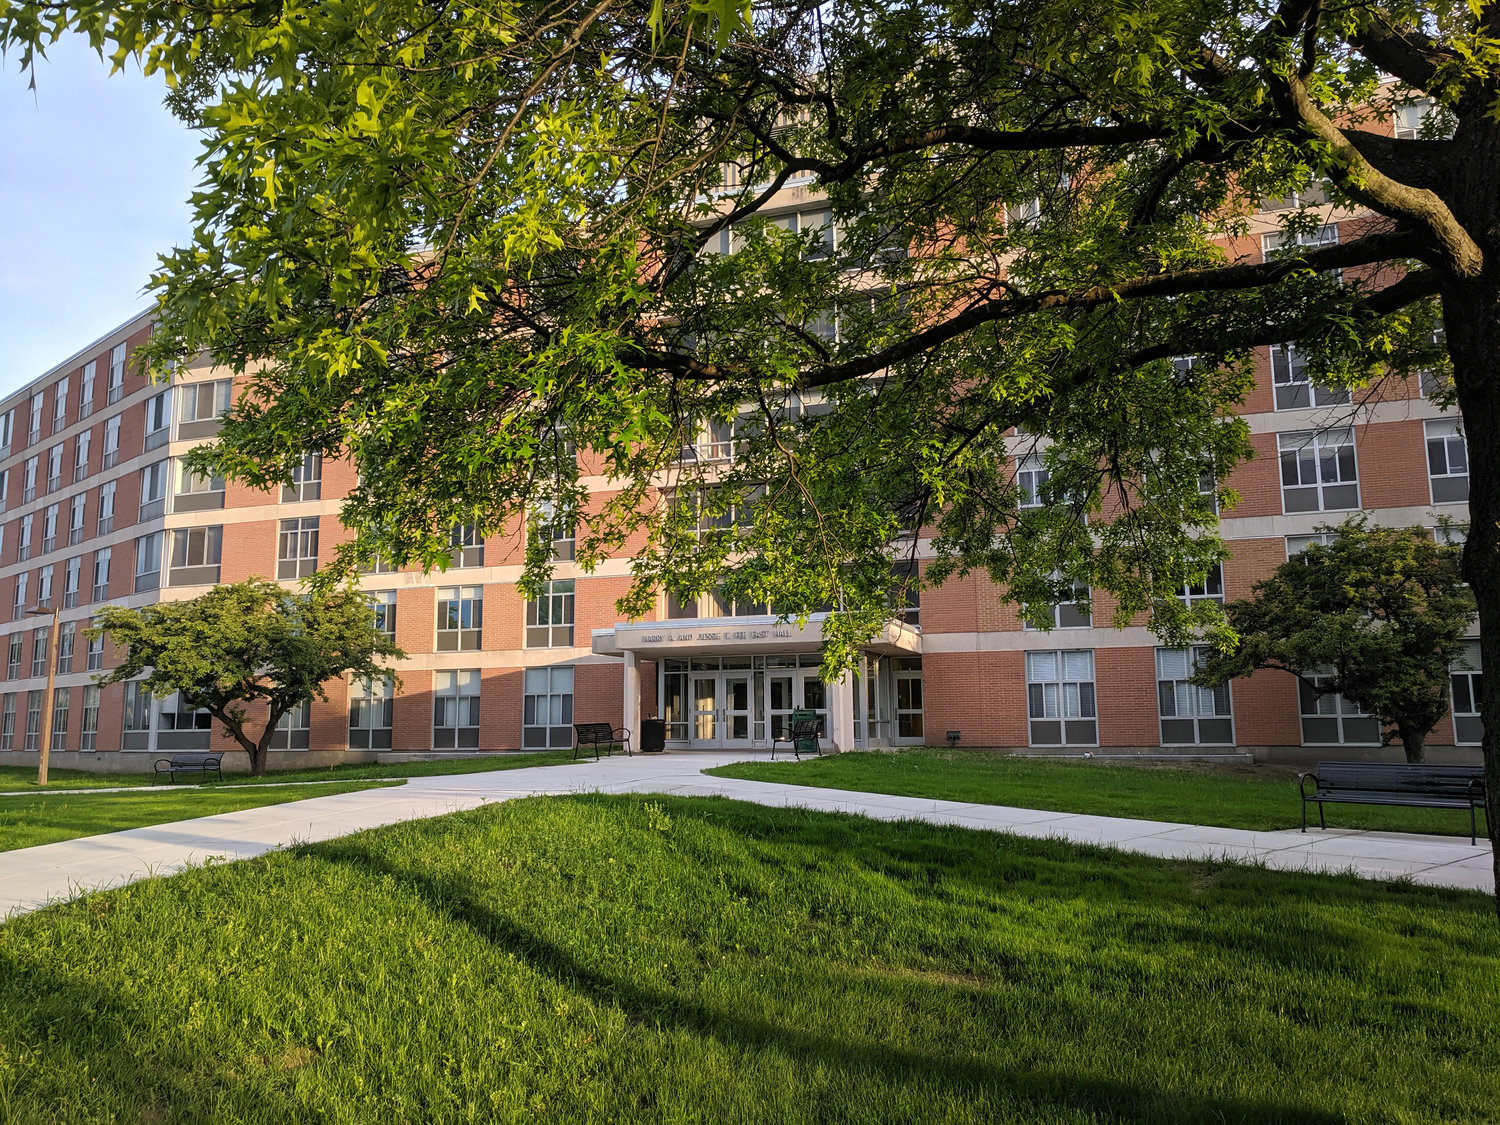 Fee Hall on the campus of Michigan State University.